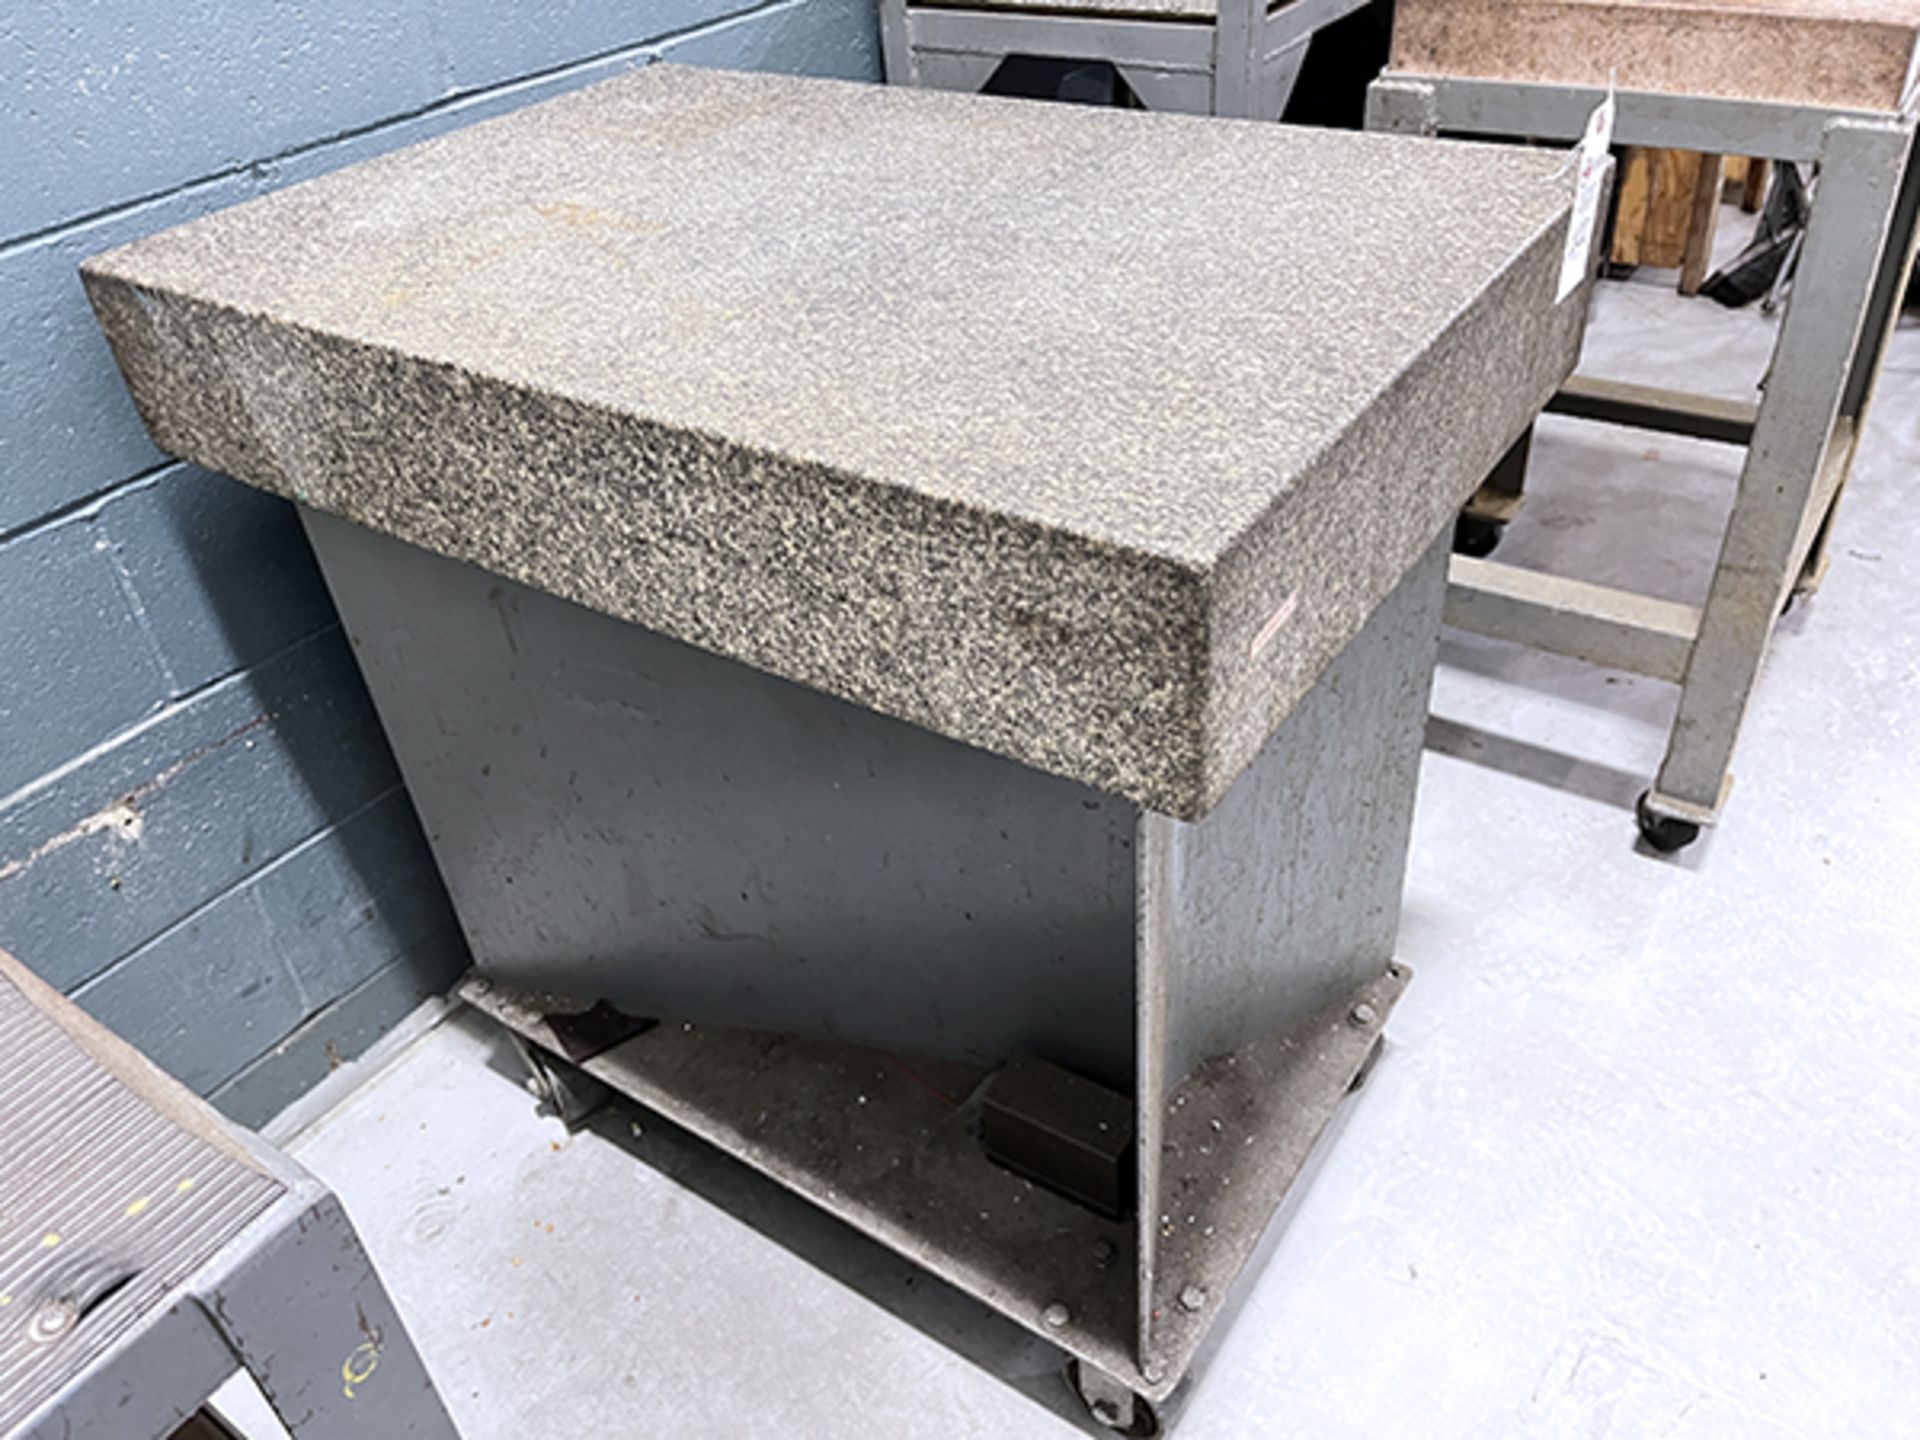 36" x 24" x 4" Granite Surface Plate - Image 2 of 5